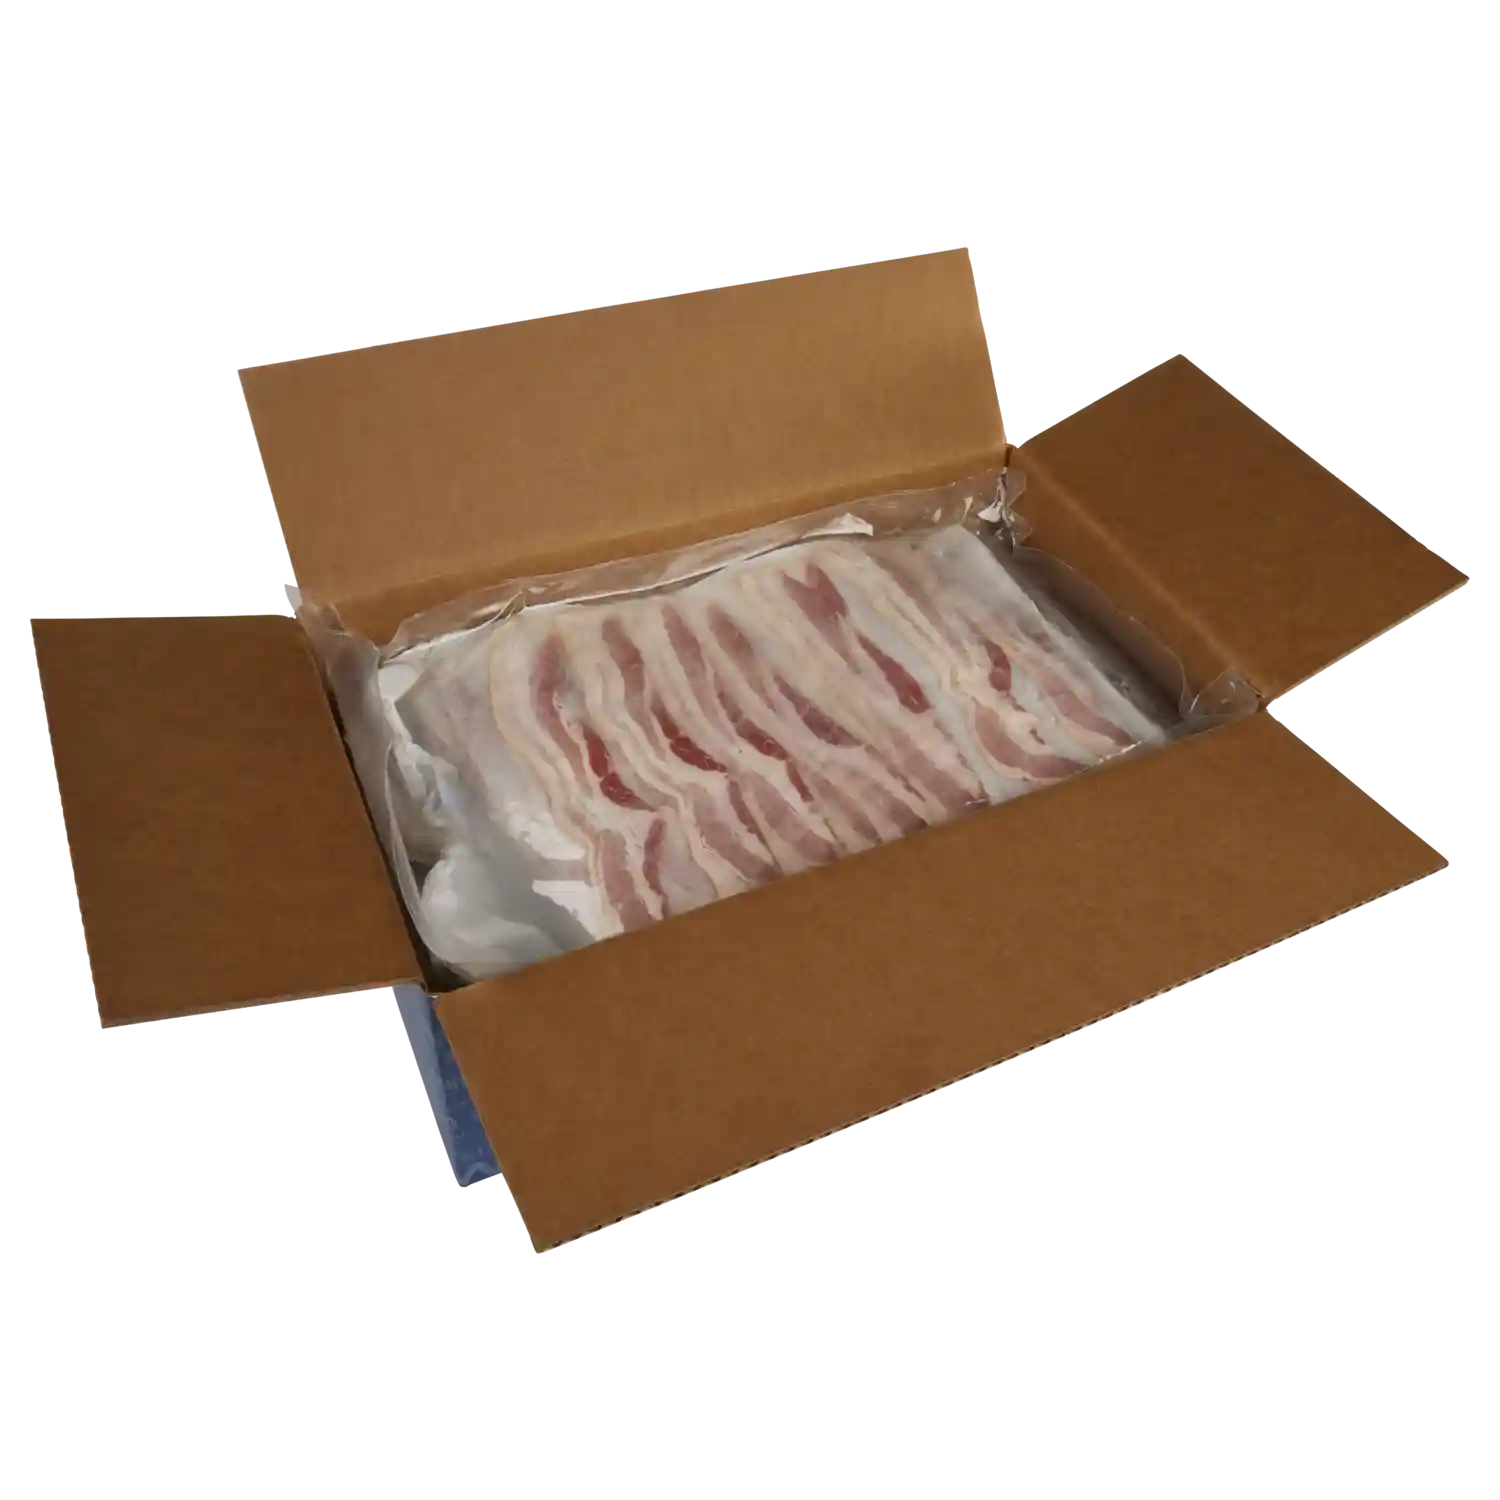 Wright® Brand Naturally Hickory Smoked Thin Sliced Bacon, Flat-Pack®, 15 Lbs, 18-22 Slices per Pound, Gas Flushed_image_41